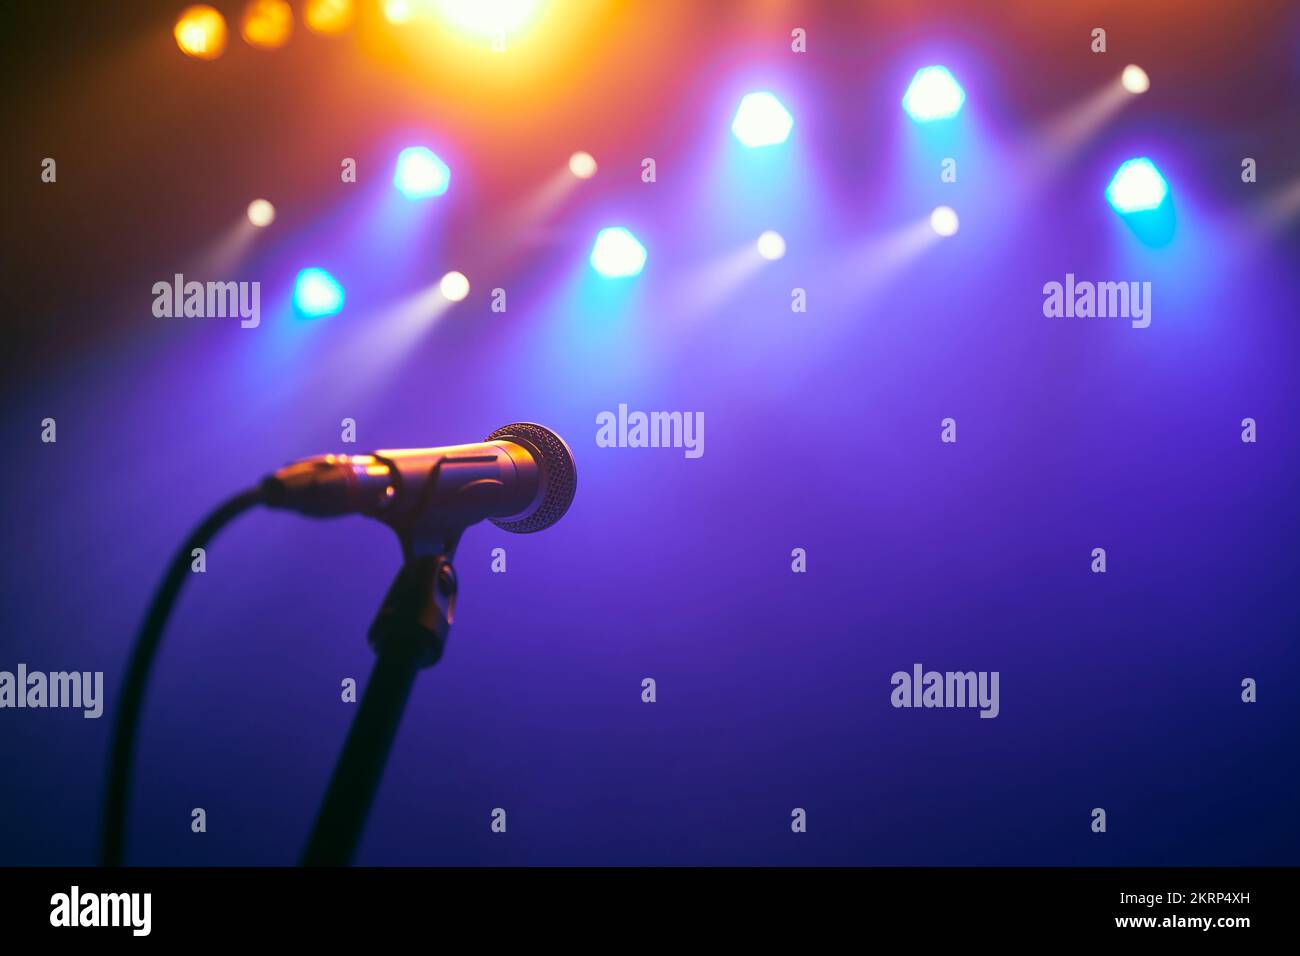 Selective focus on lluminated microphone on stage against colorful spotlights. Stock Photo